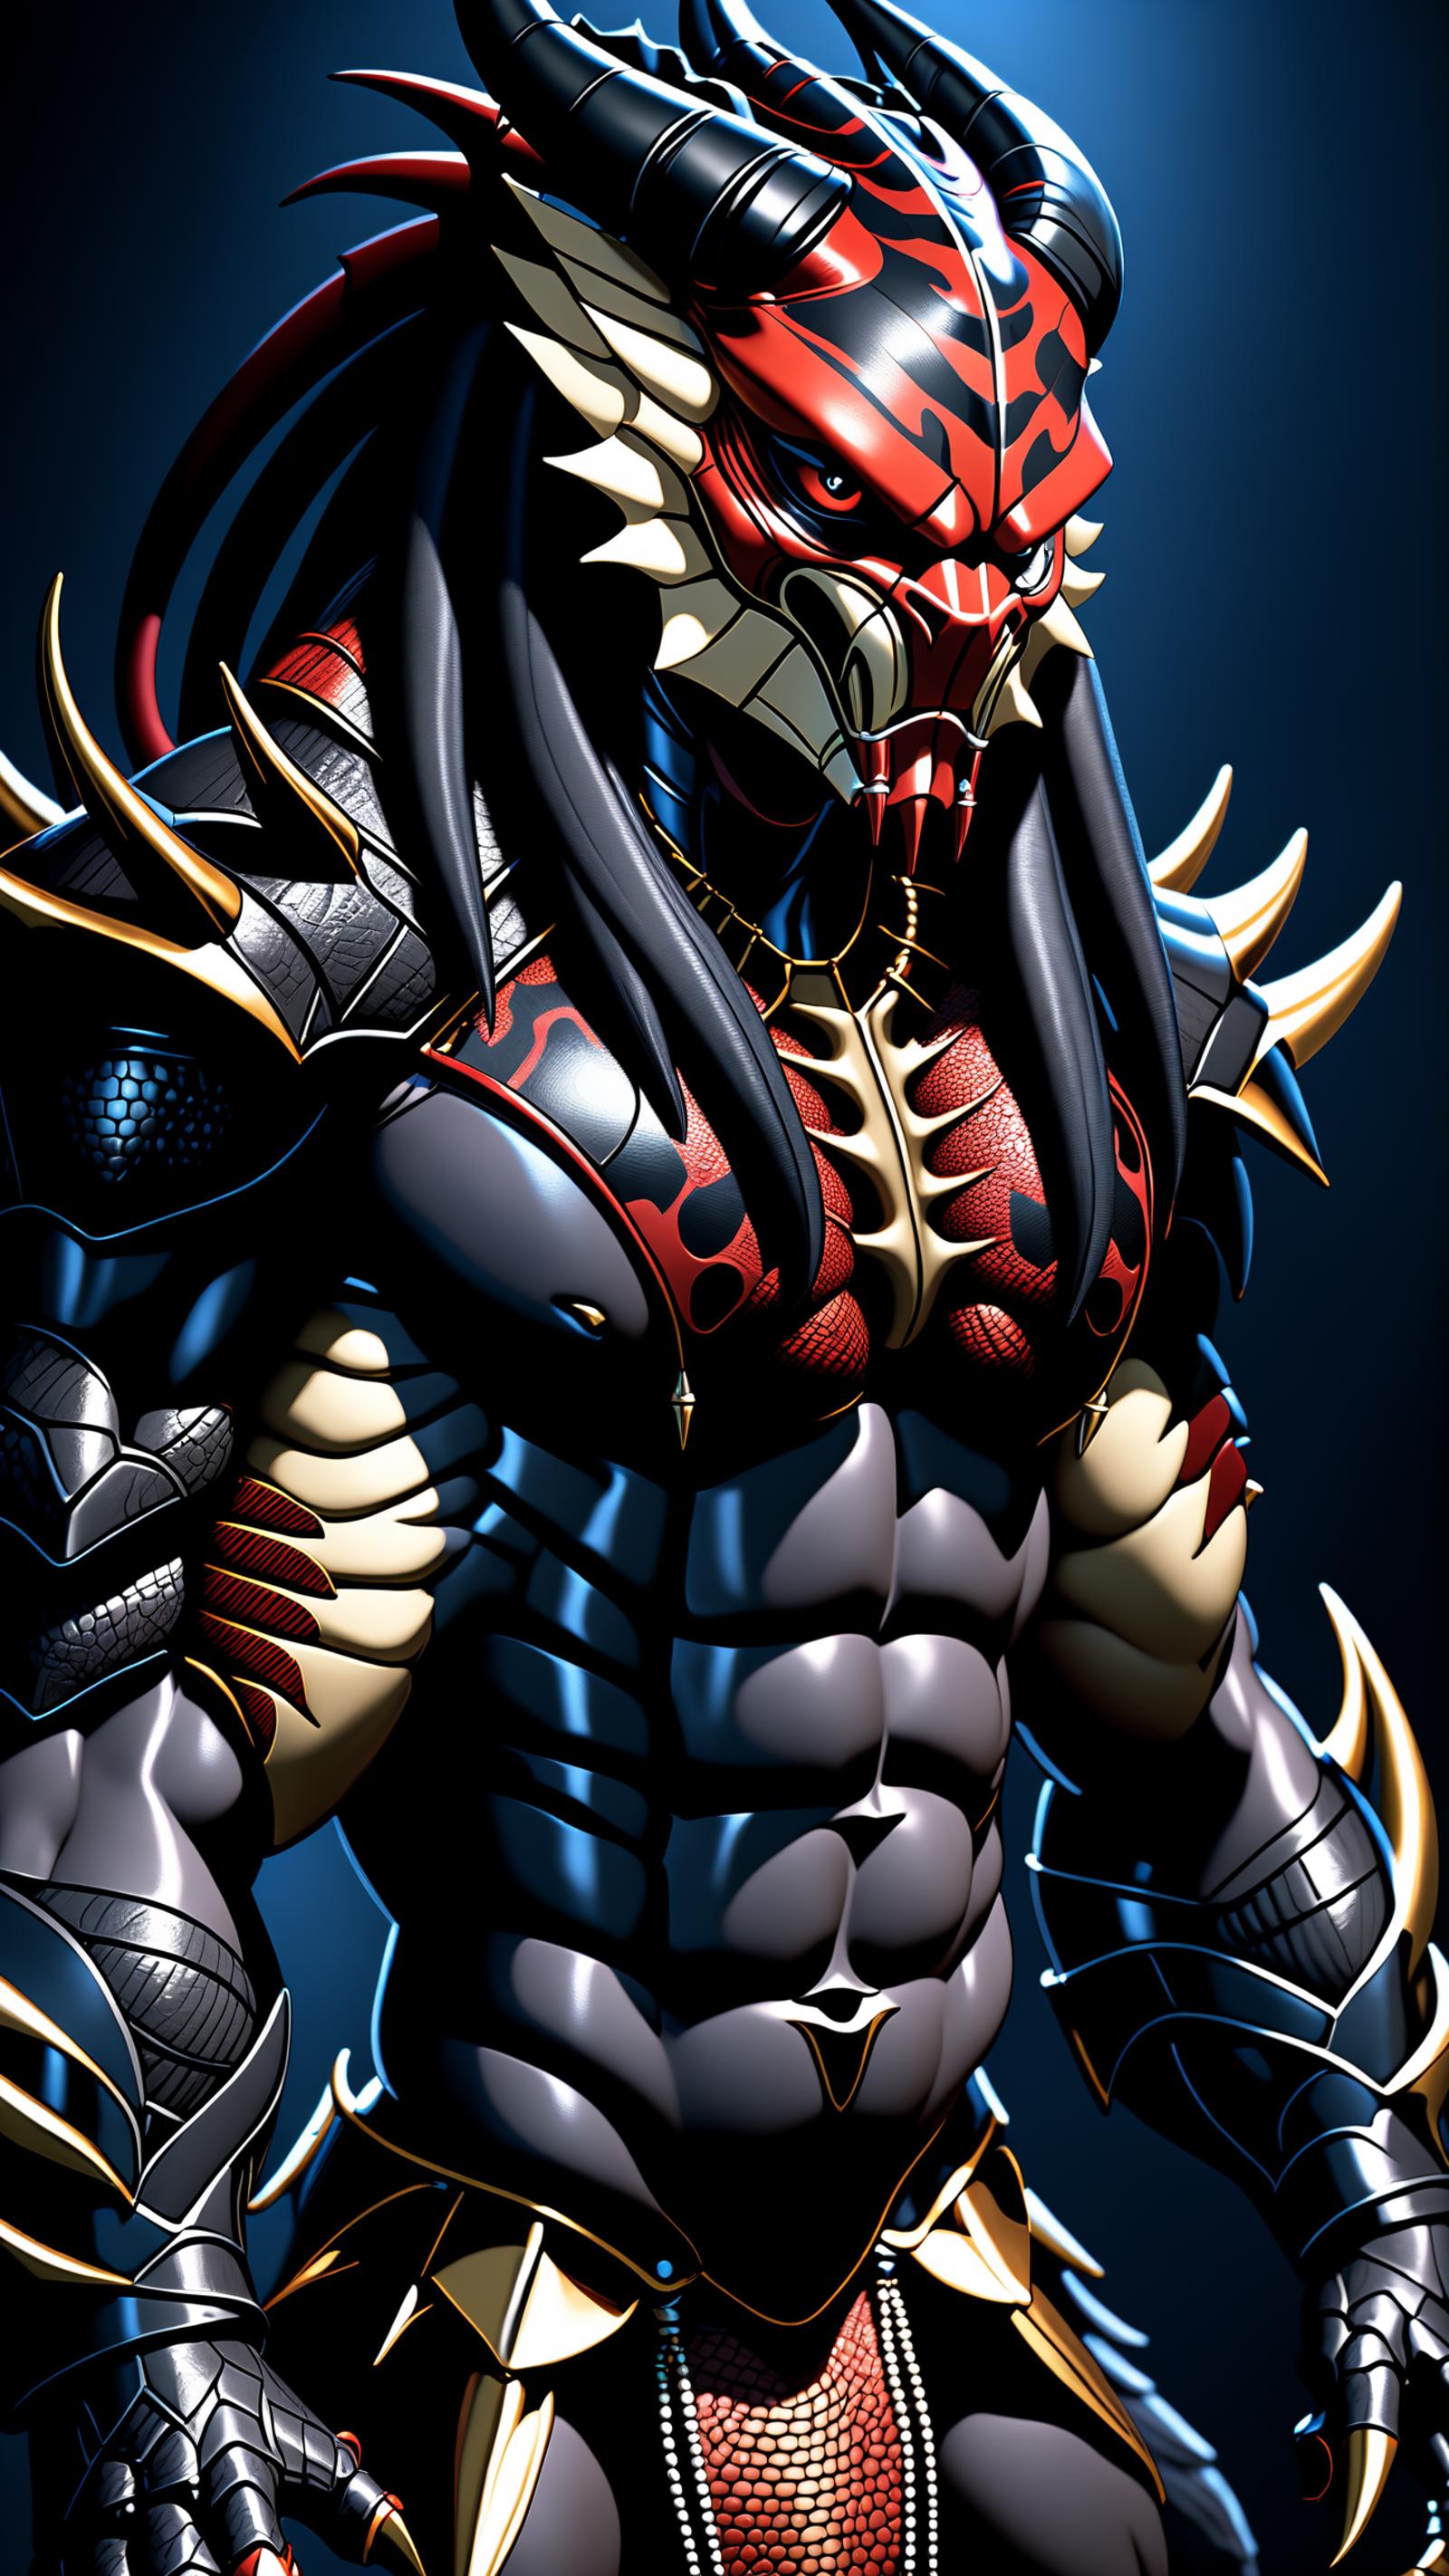 A CGI depiction of a muscular, armored warrior with a demonic appearance.